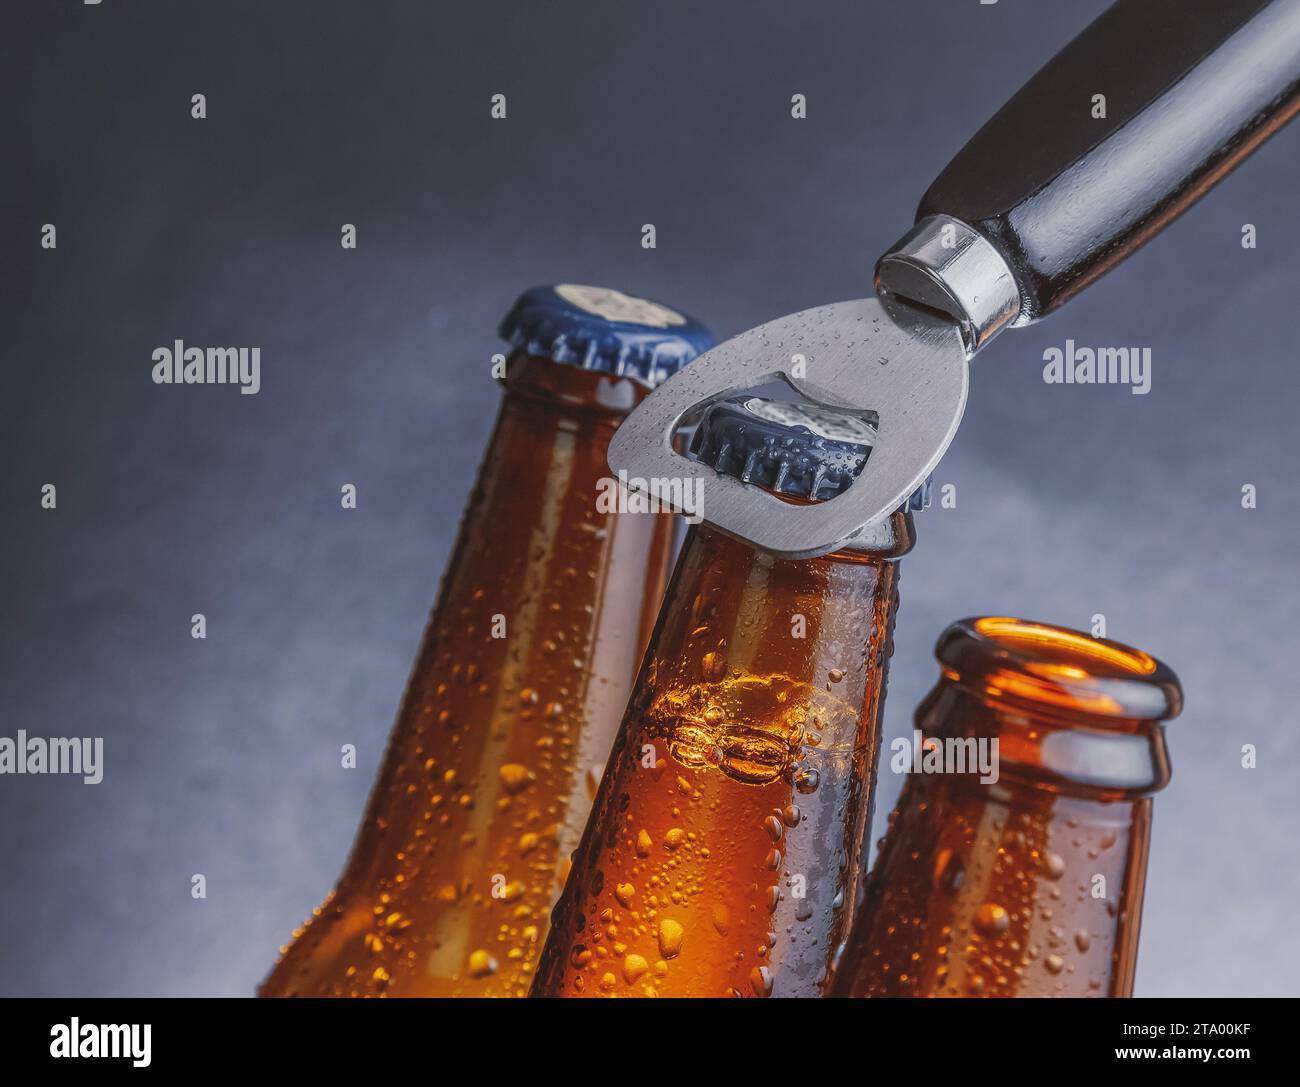 three fresh cold beer ale bottles with drops and stopper open with bottle opener on dark background Stock Photo